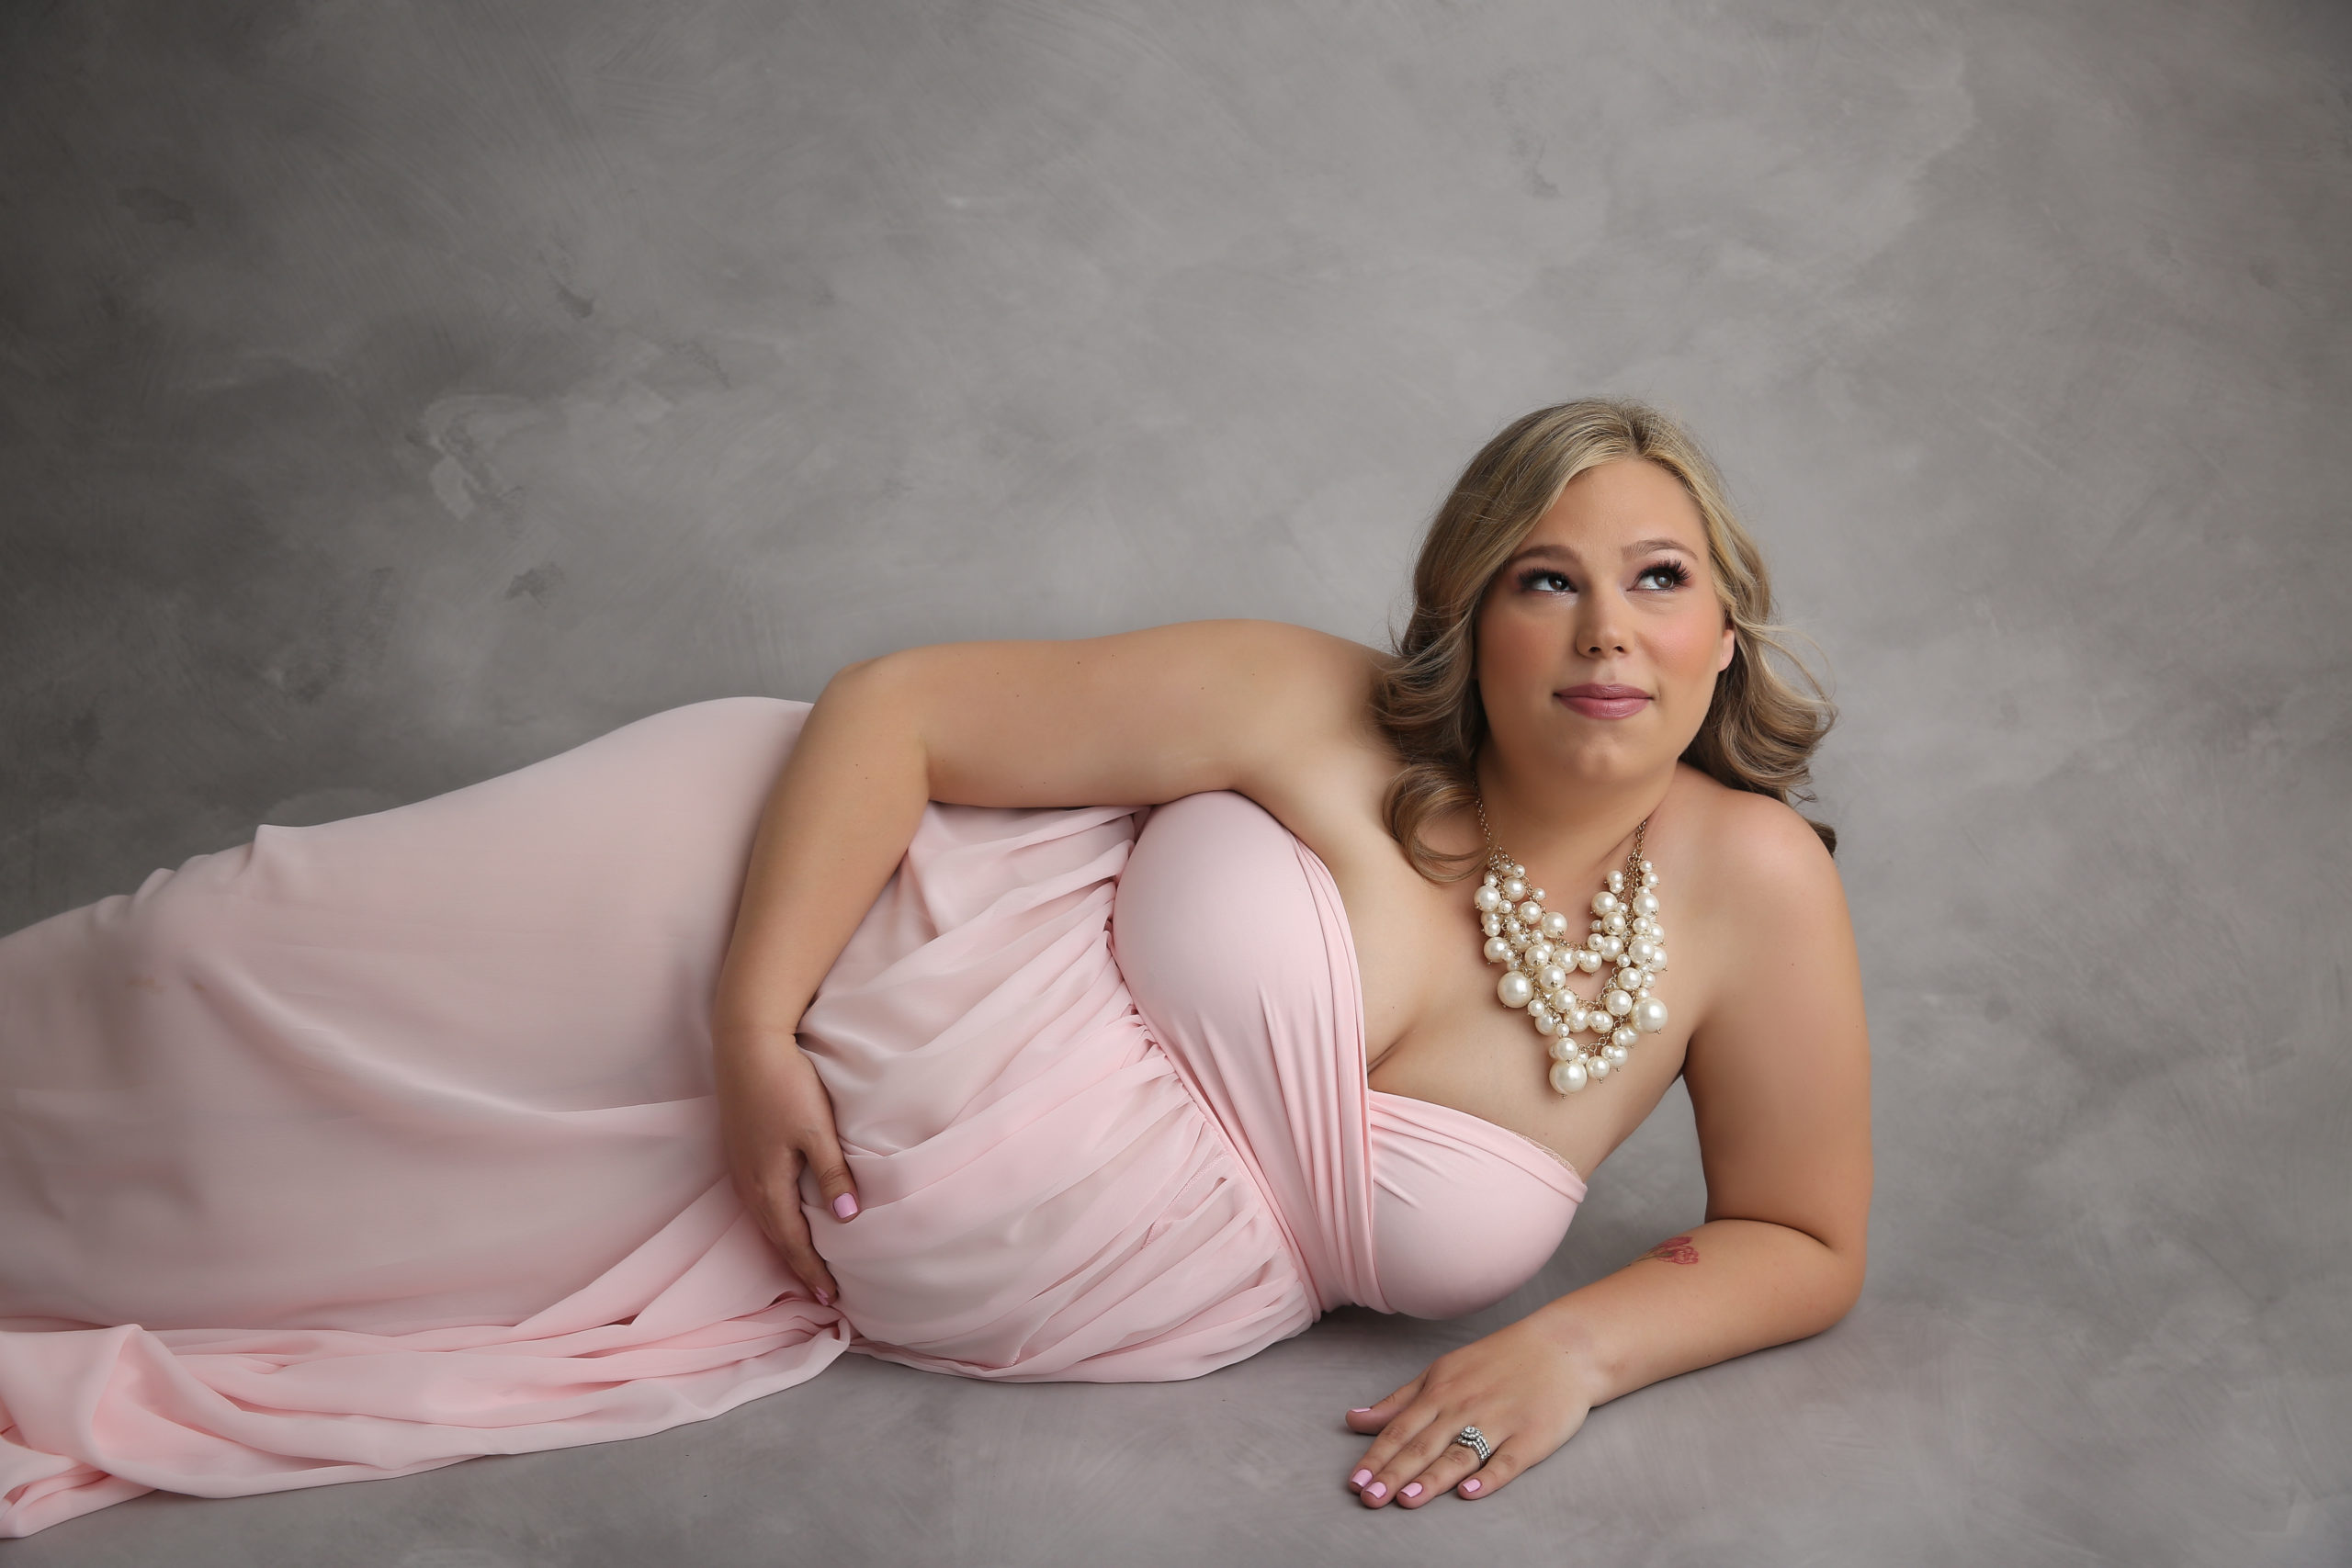 How to Prepare for Your Maternity Photography Session - Rachel Gregory  Photography